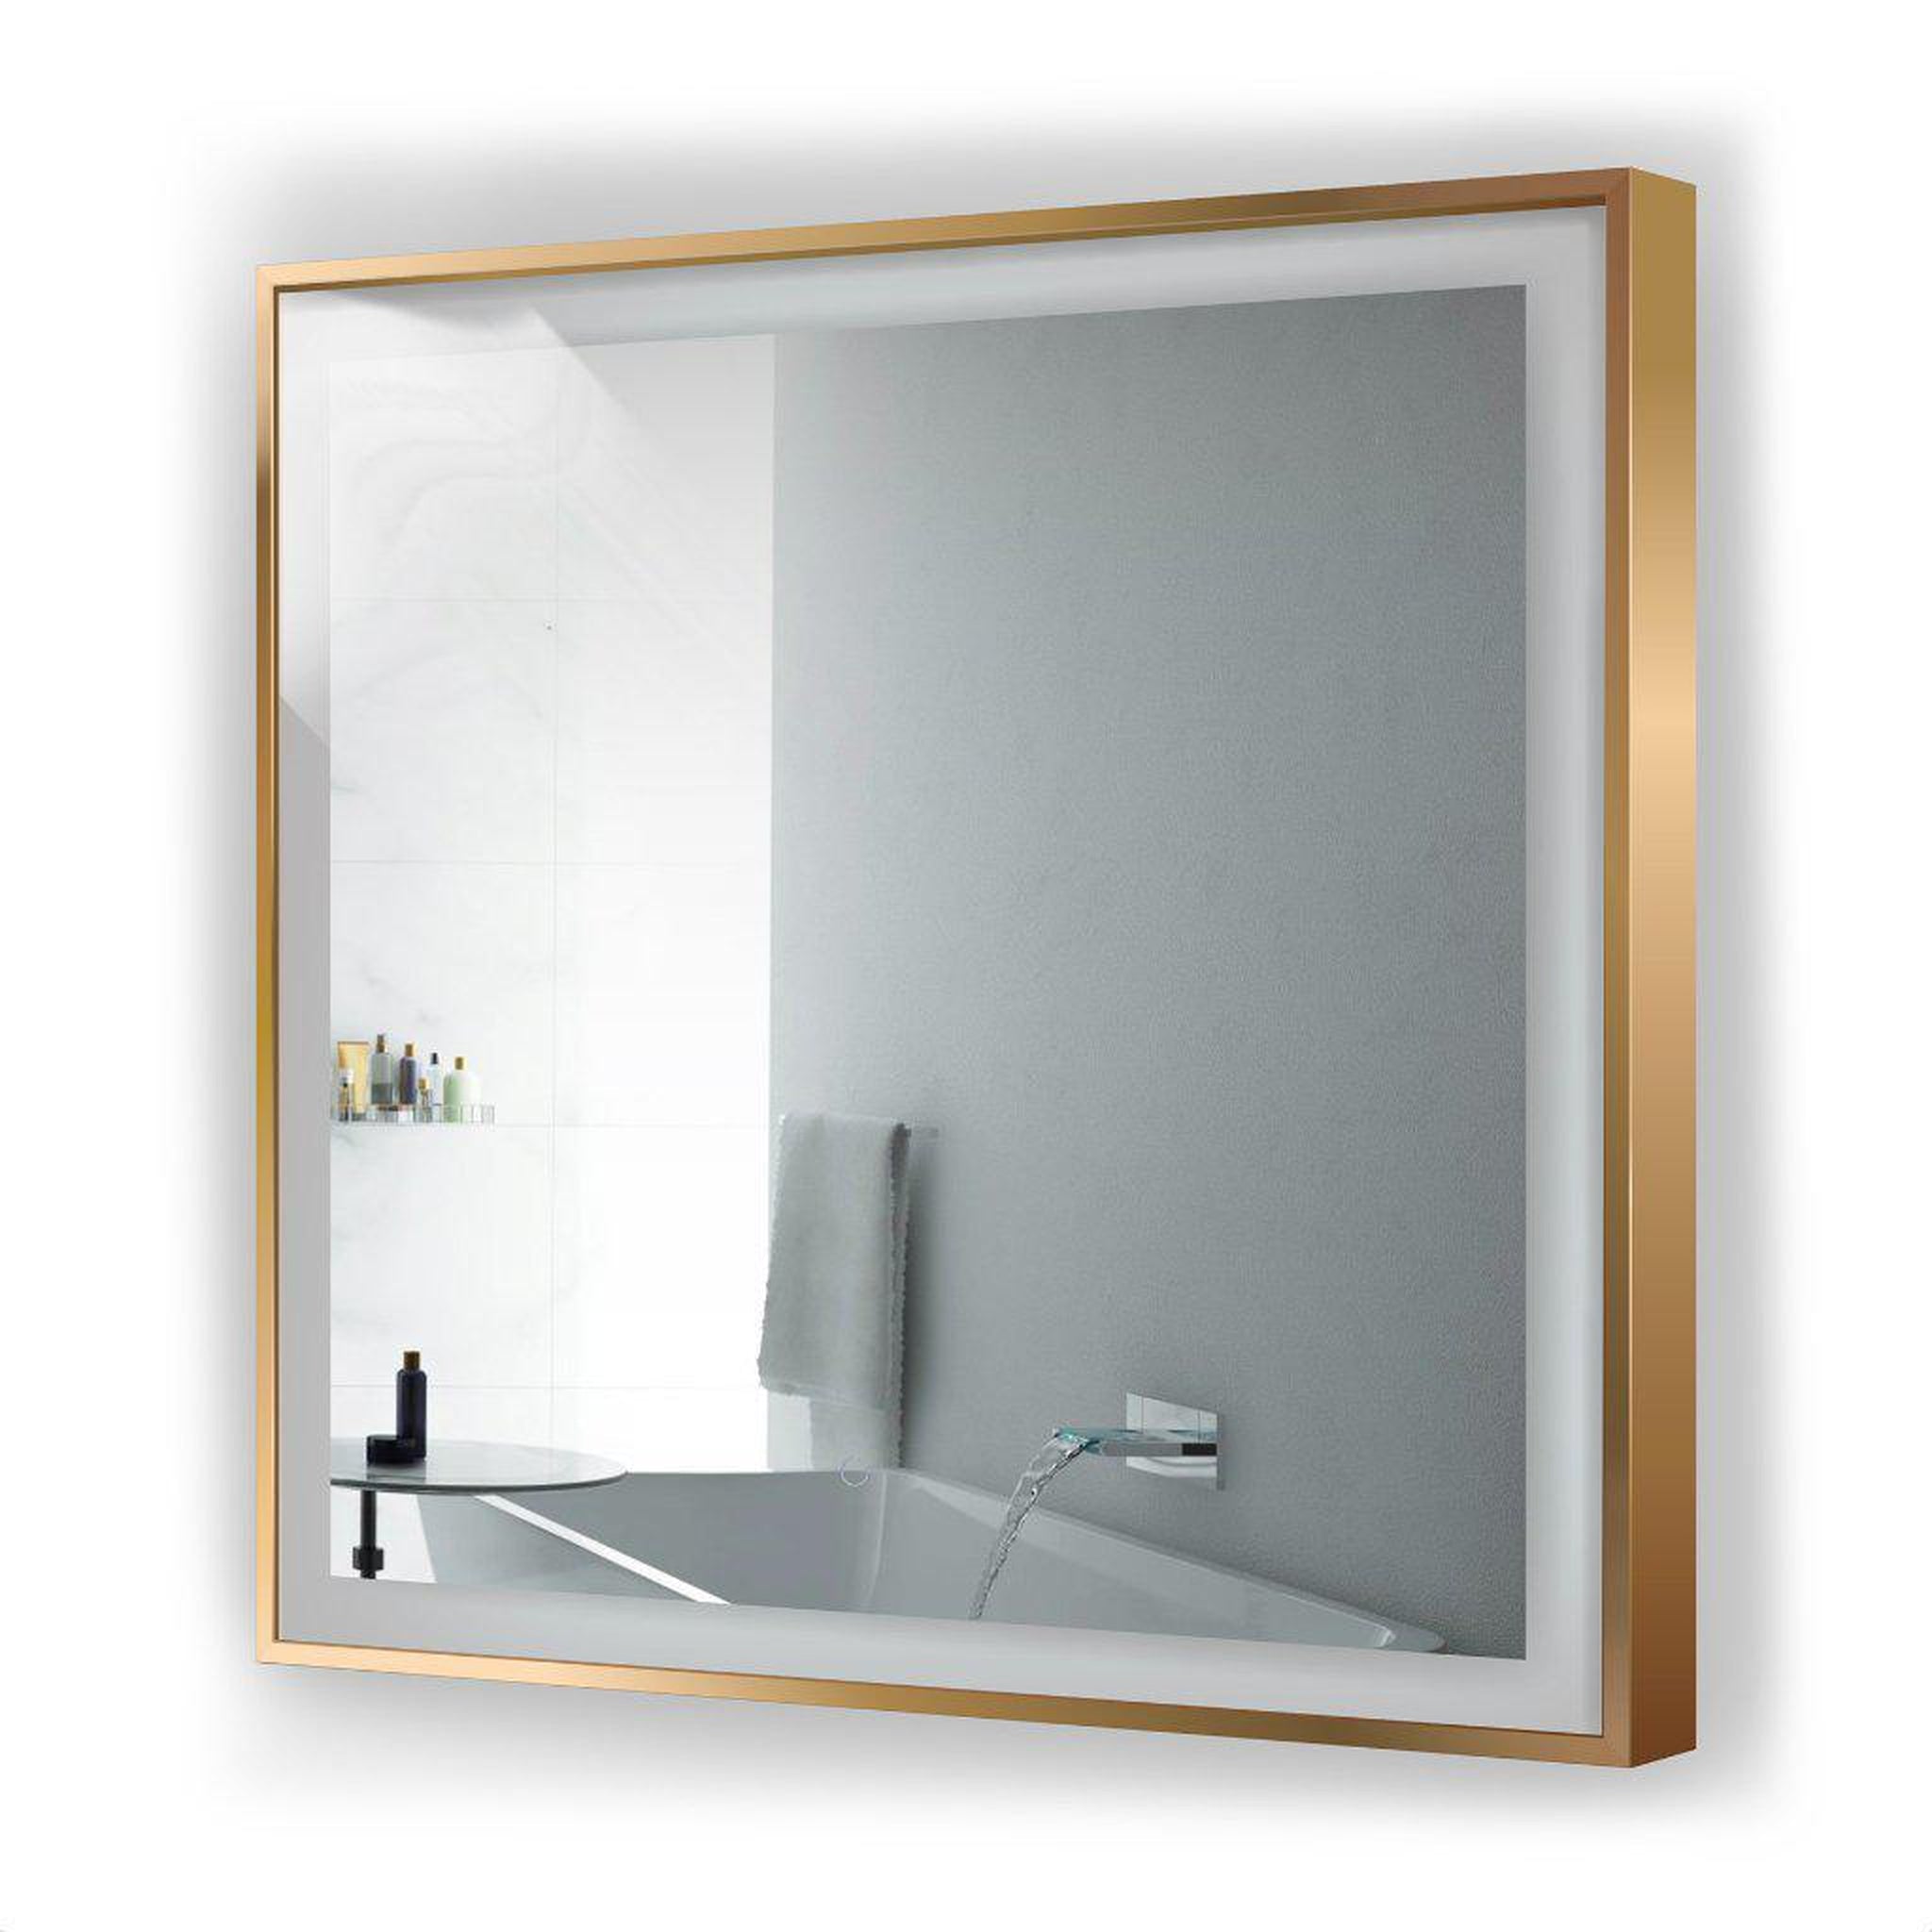 Krugg Reflections, Krugg Reflections Soho 36" x 36" 5000K Square Matte Gold Wall-Mounted Framed LED Bathroom Vanity Mirror With Built-in Defogger and Dimmer